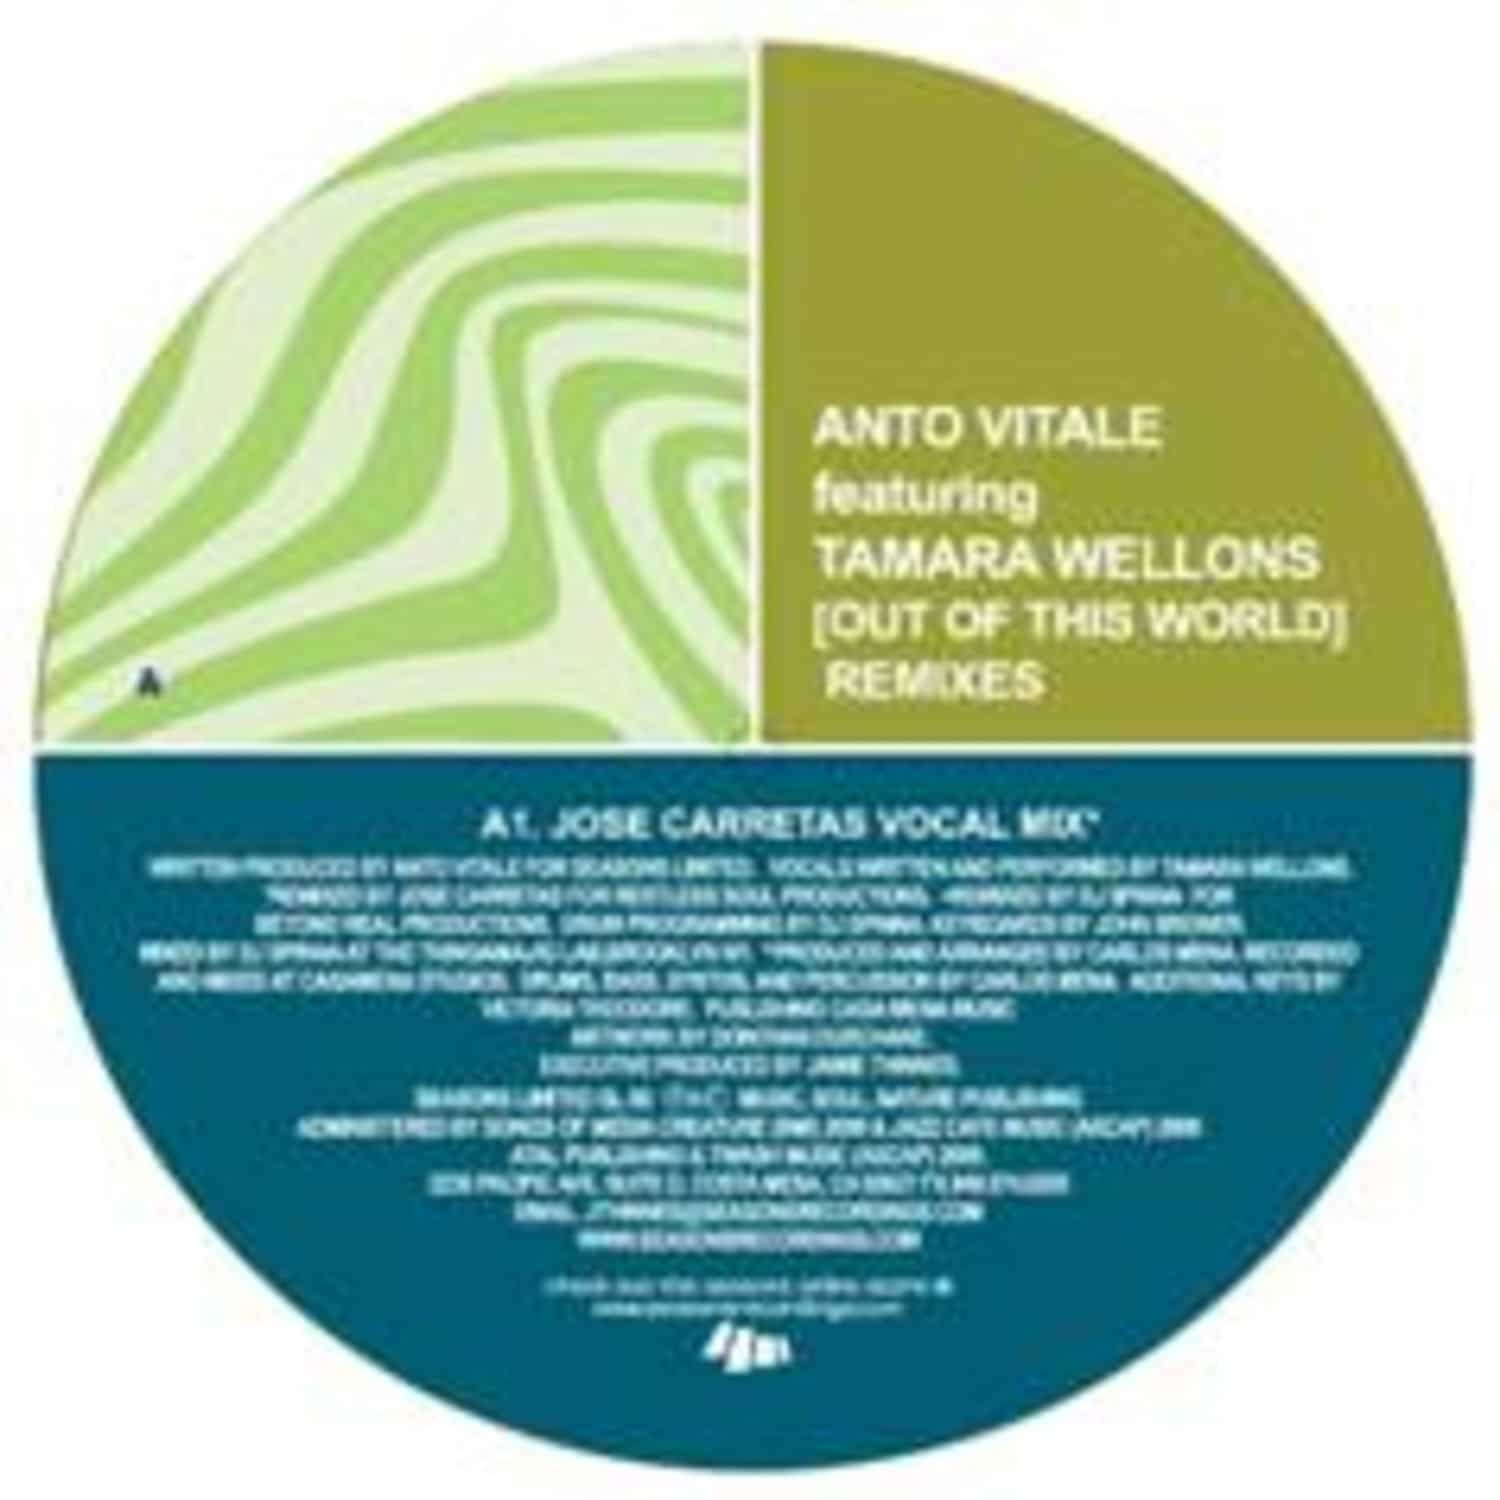 Anto Vitale Feat Tamara Wellons - OUT OF THIS WORLD REMIXES